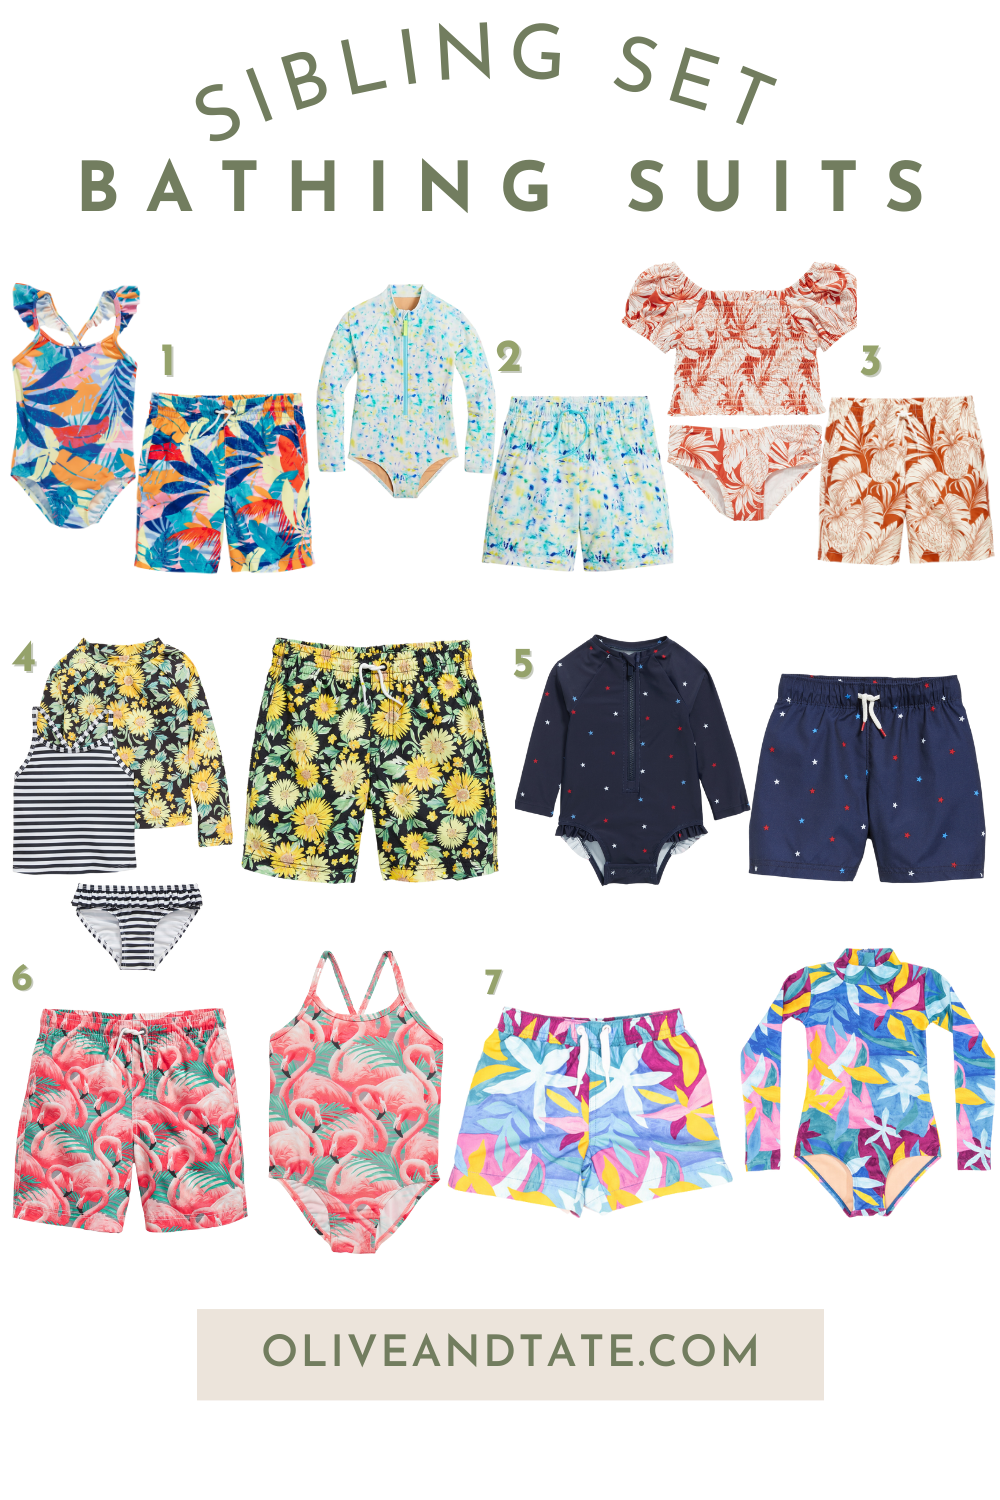 The Best Sibling Set Bathing Suits